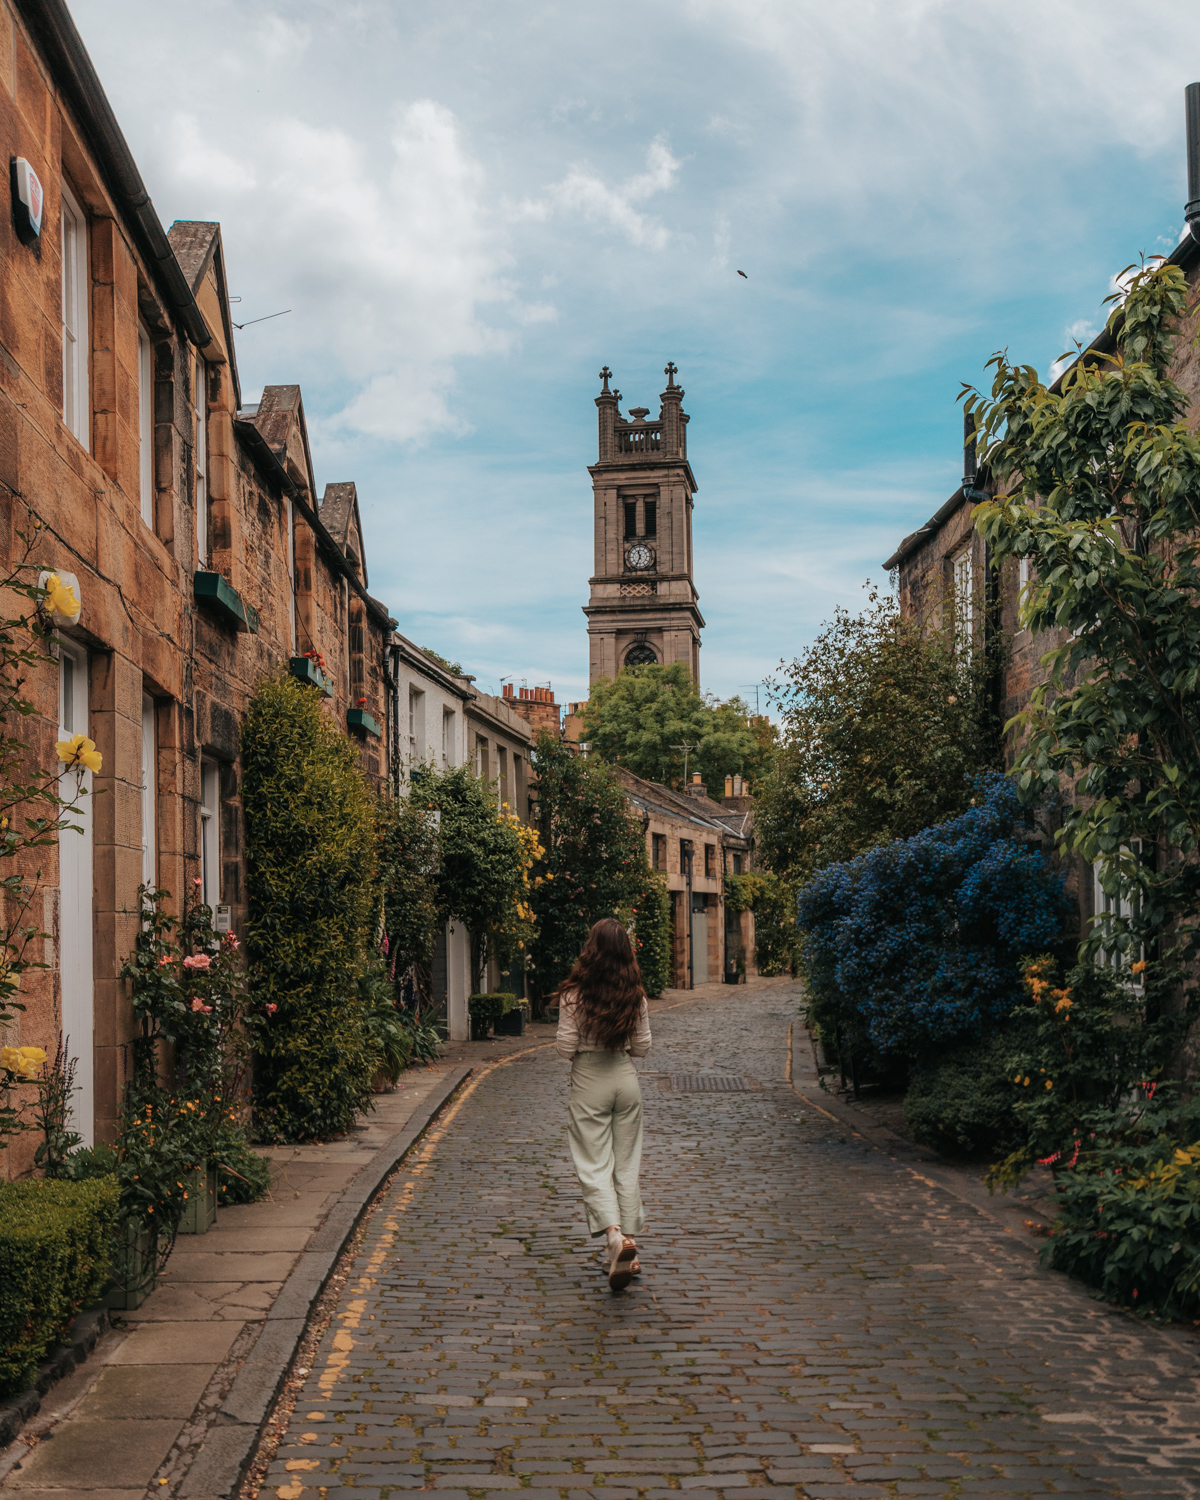 Girl standing in the middle of a cobblestone street lined with small houses and flowers with a church tower in the background - Circus Lane, Edinburgh, Scotland